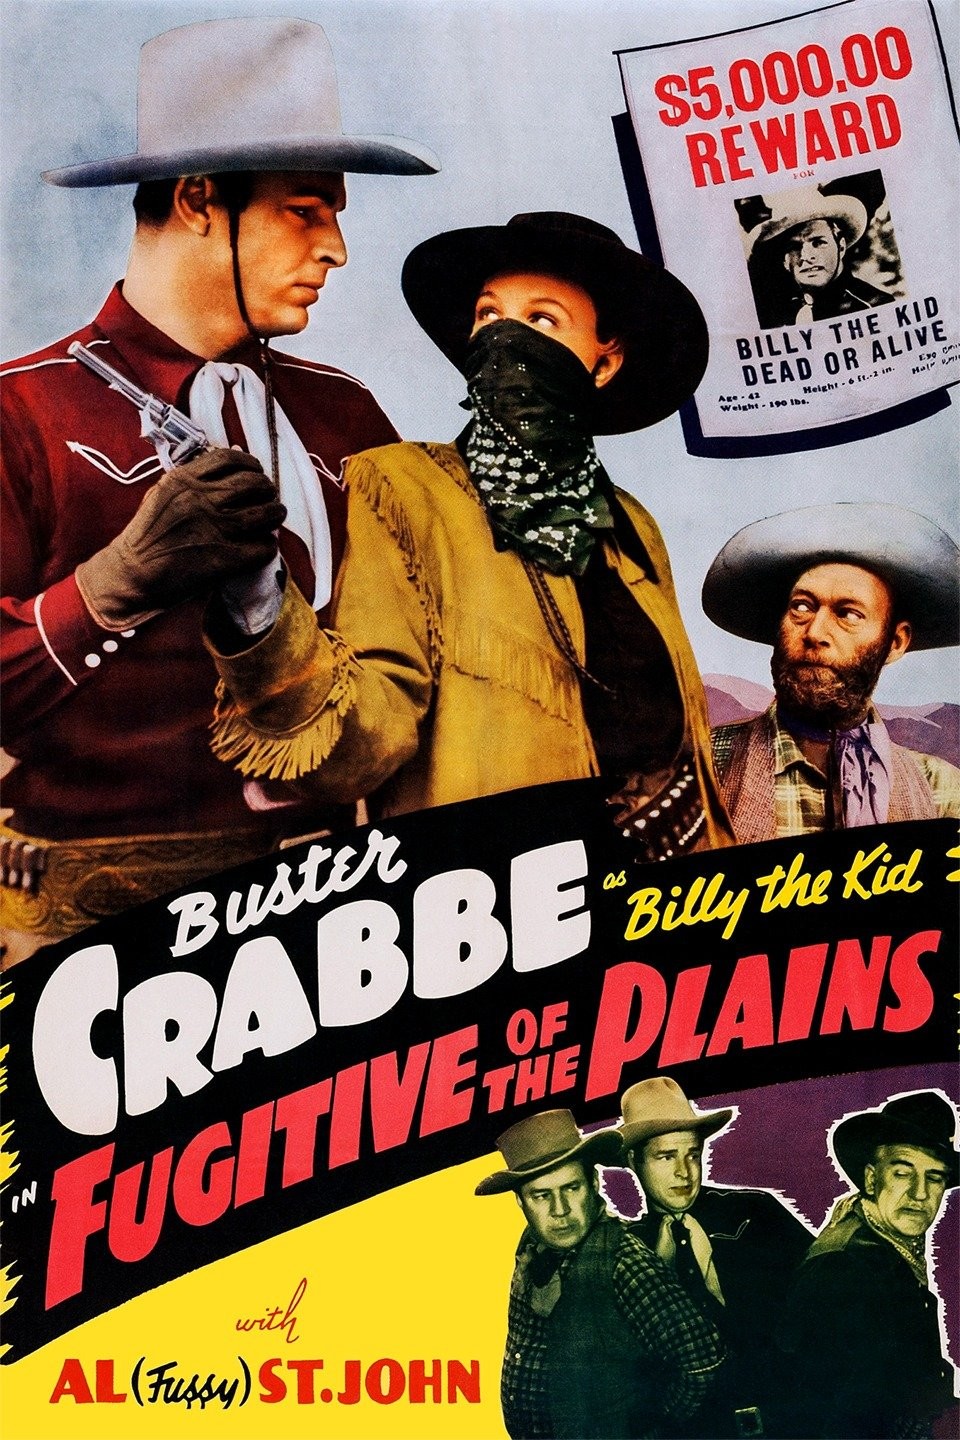 Buster Crabbe – Movies, Bio and Lists on MUBI